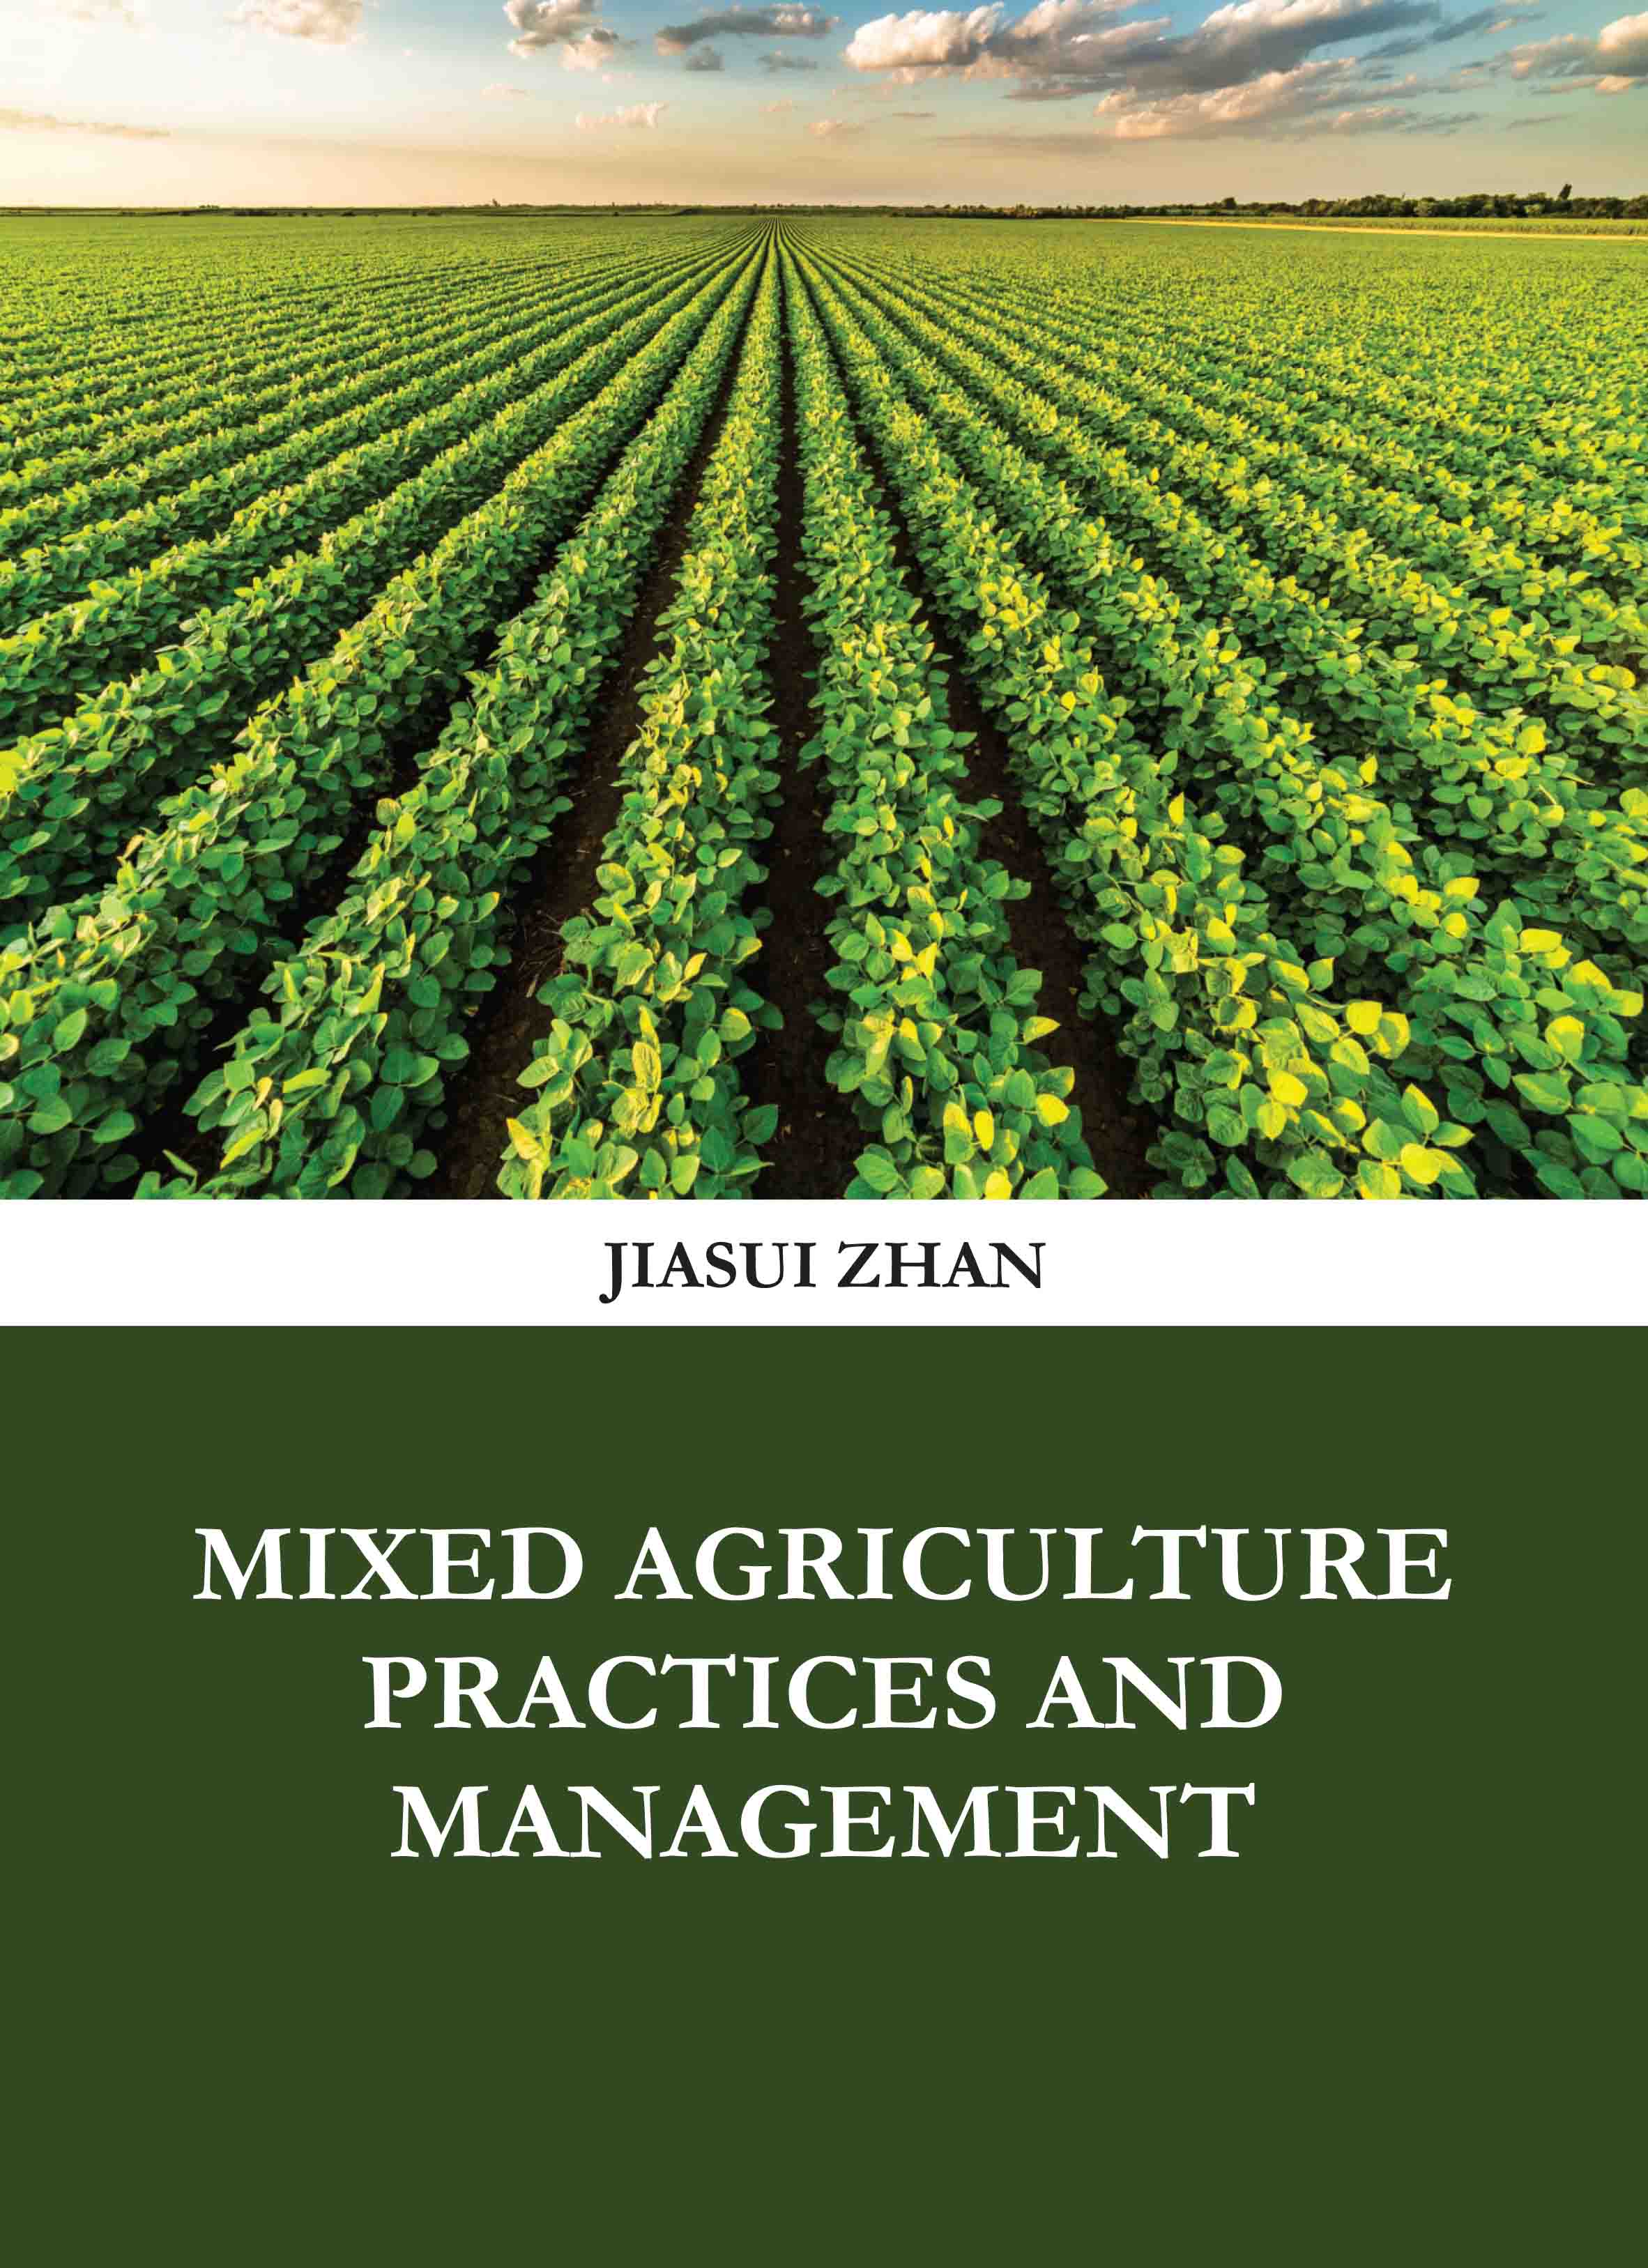 Mixed Agriculture Practices and Management